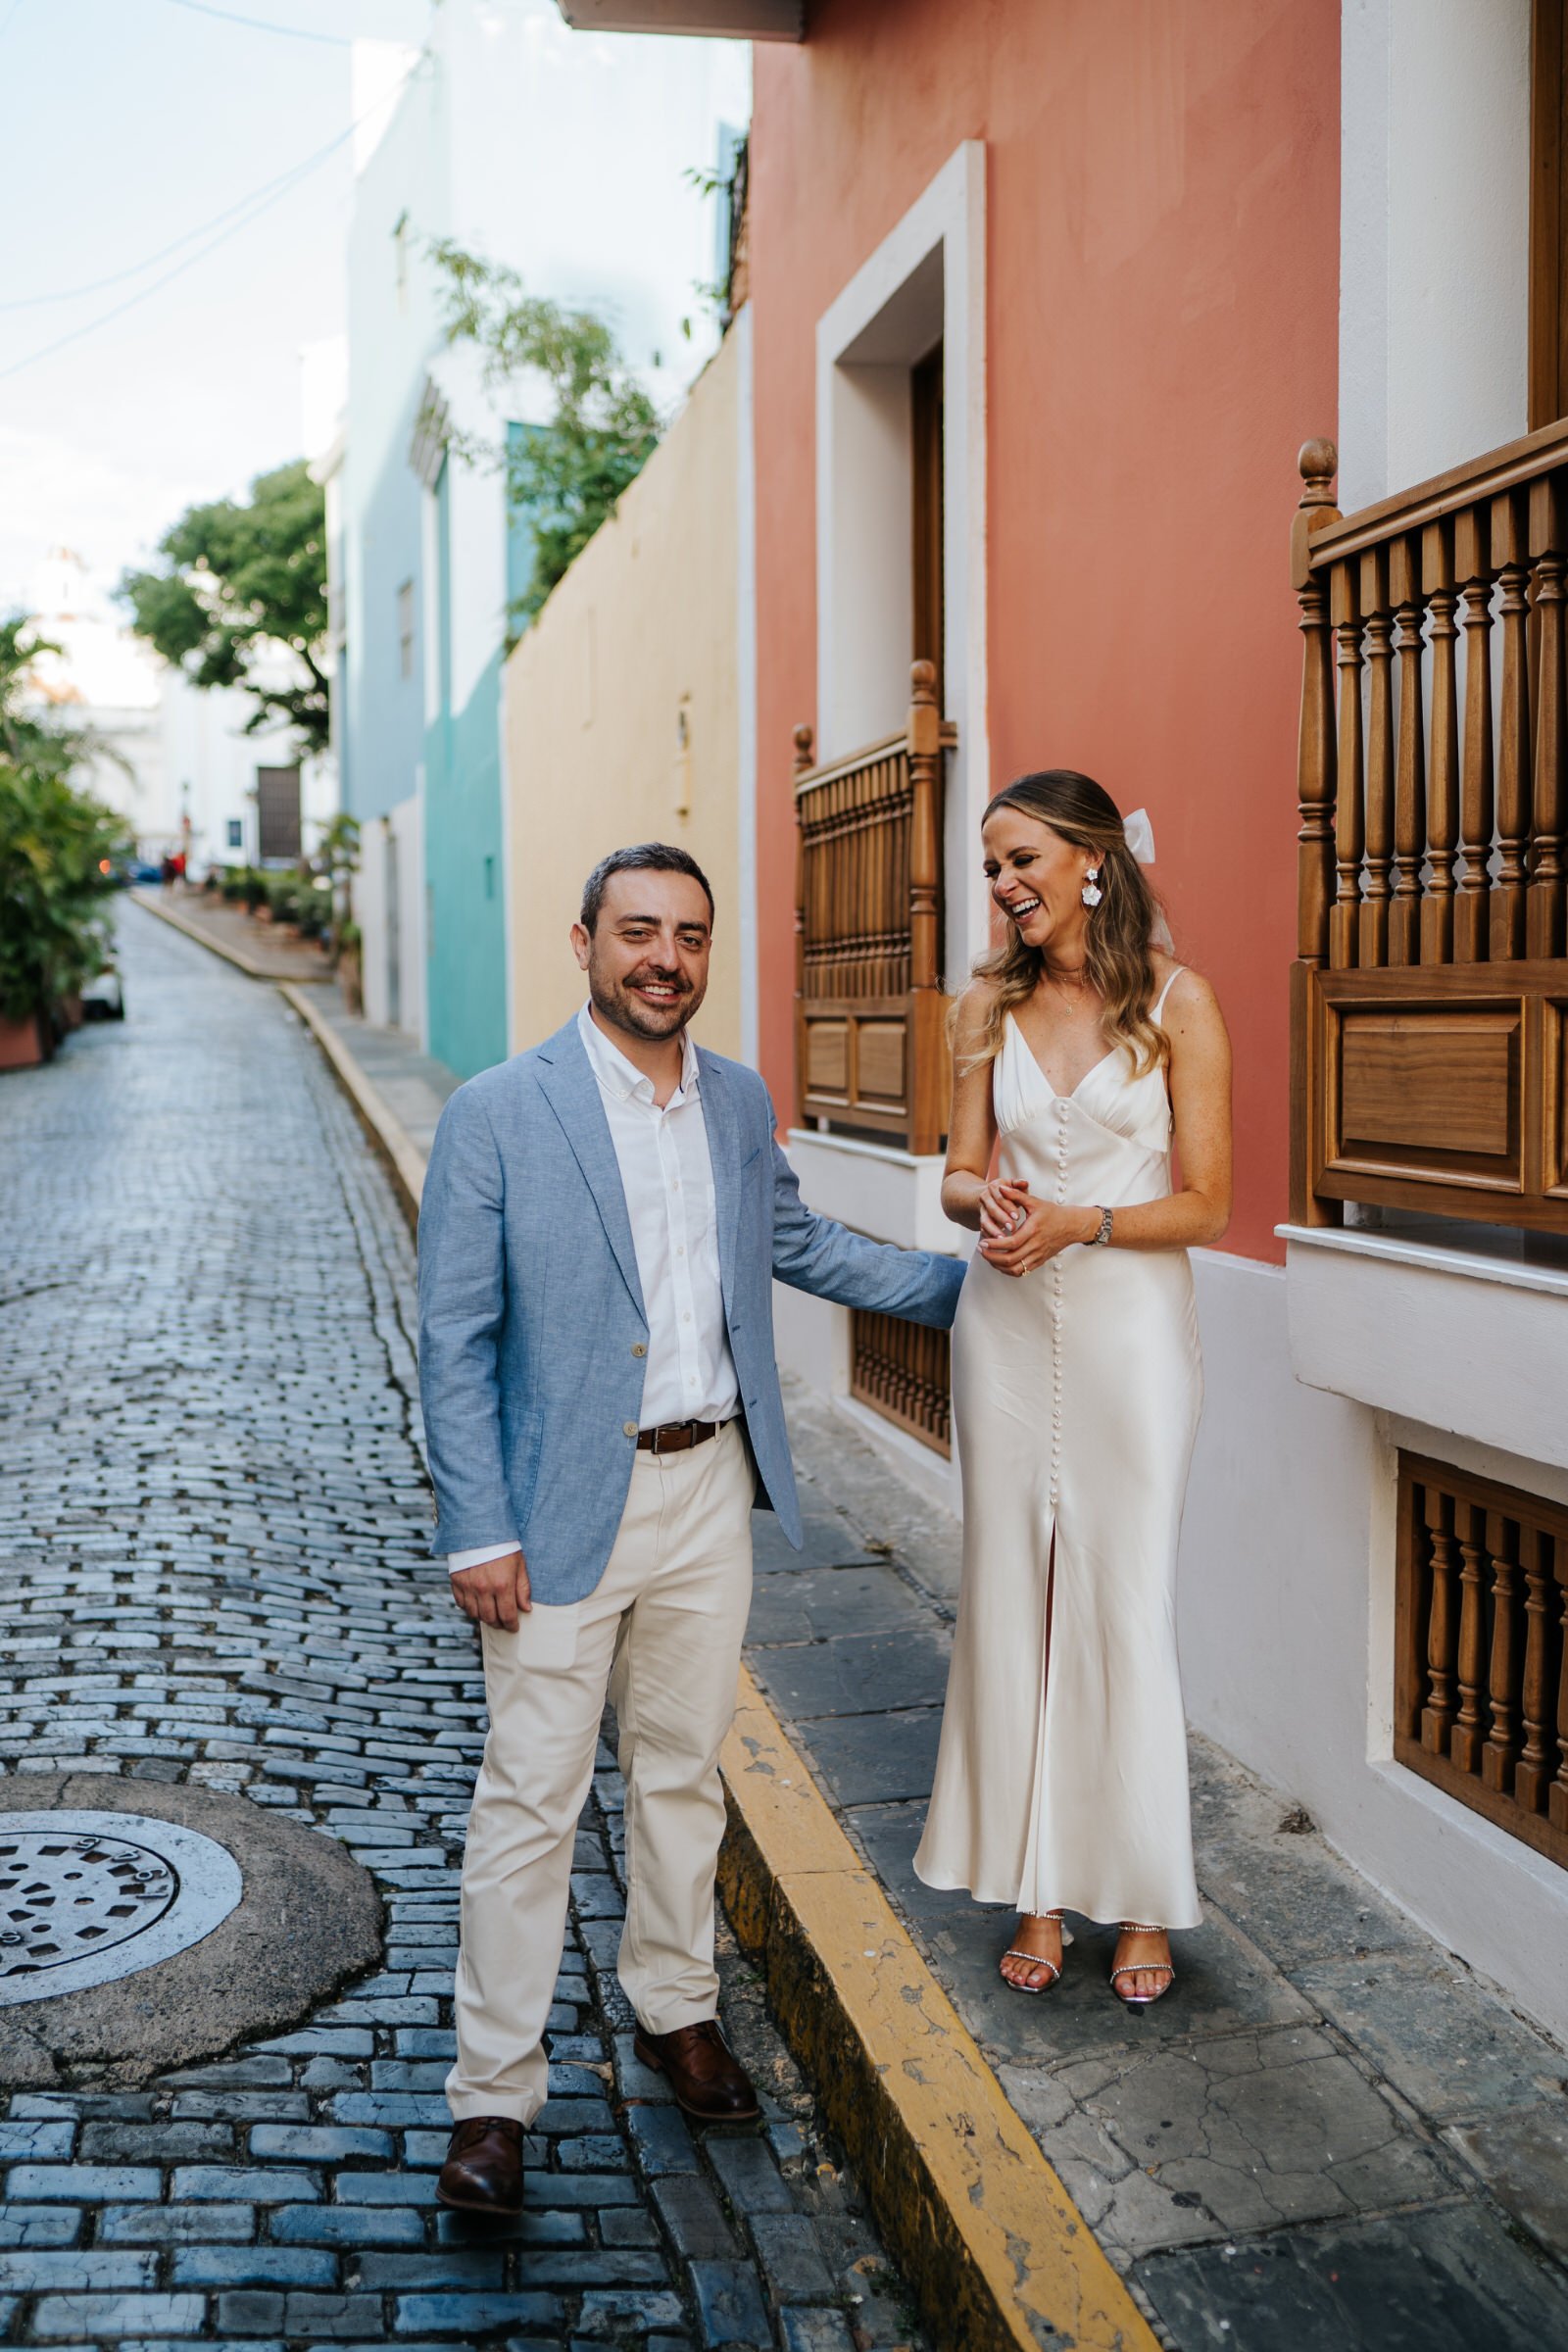 Bride and groom walking down the cobbled streets of Old San Juan share a spontaneous moment of laughter with each other